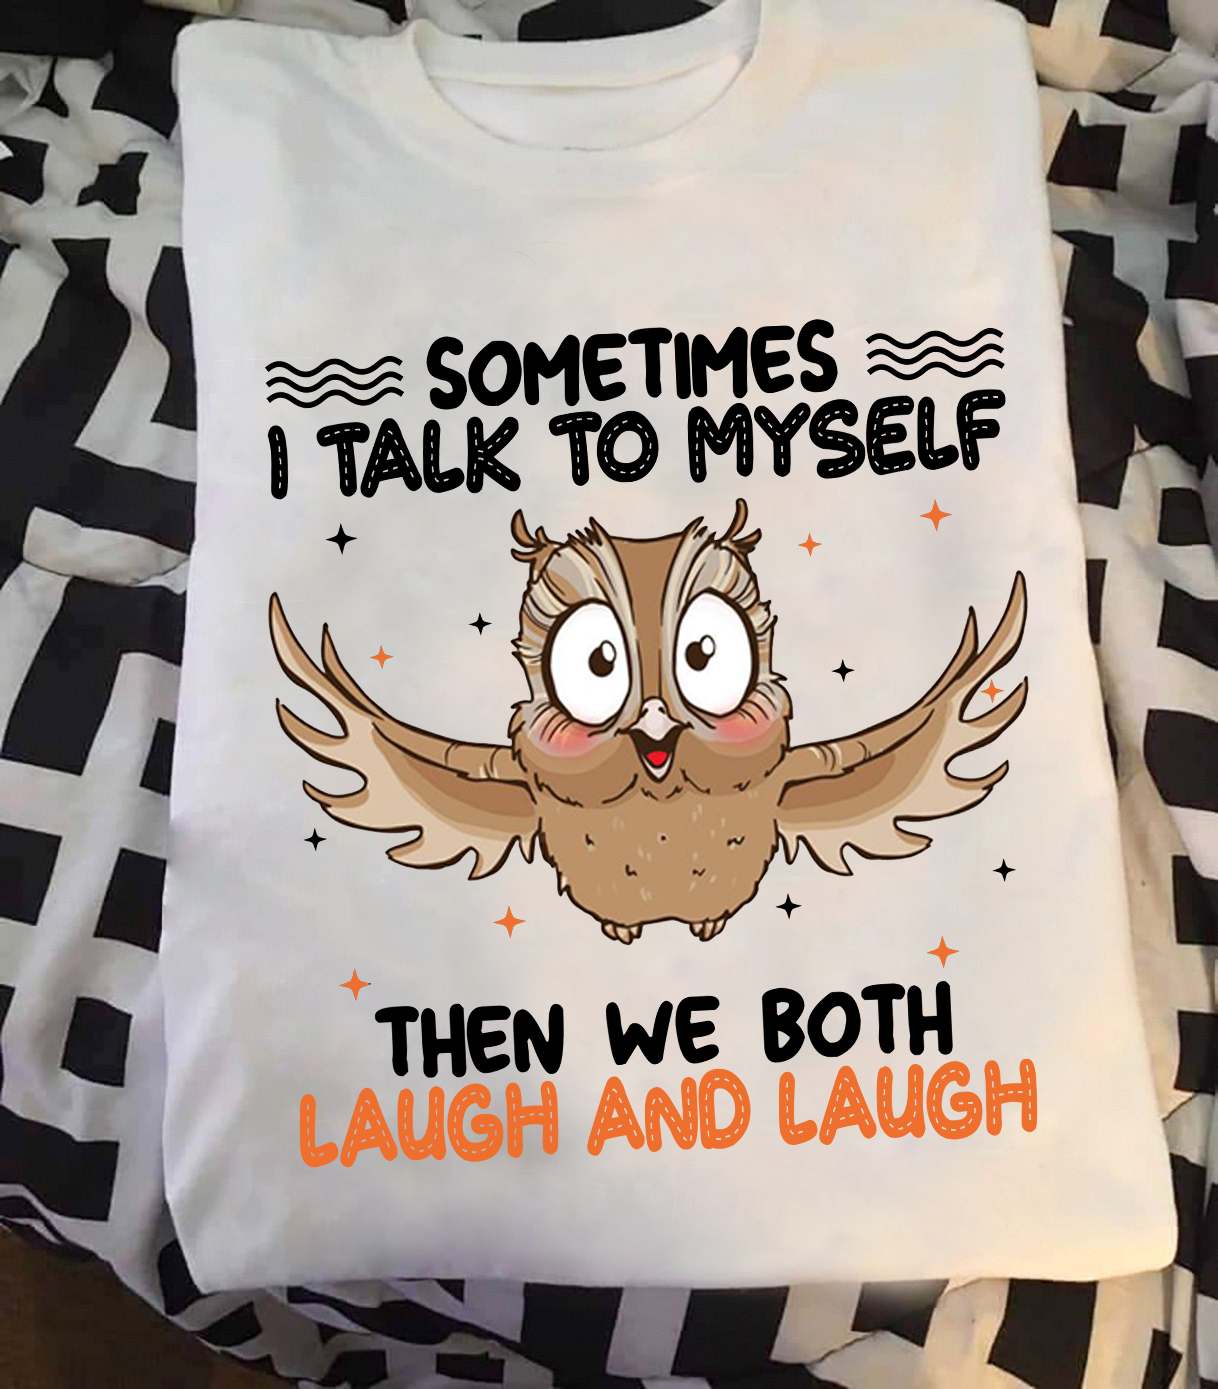 Sometime I talk to myself then we both laugh and laugh - Laughing owl